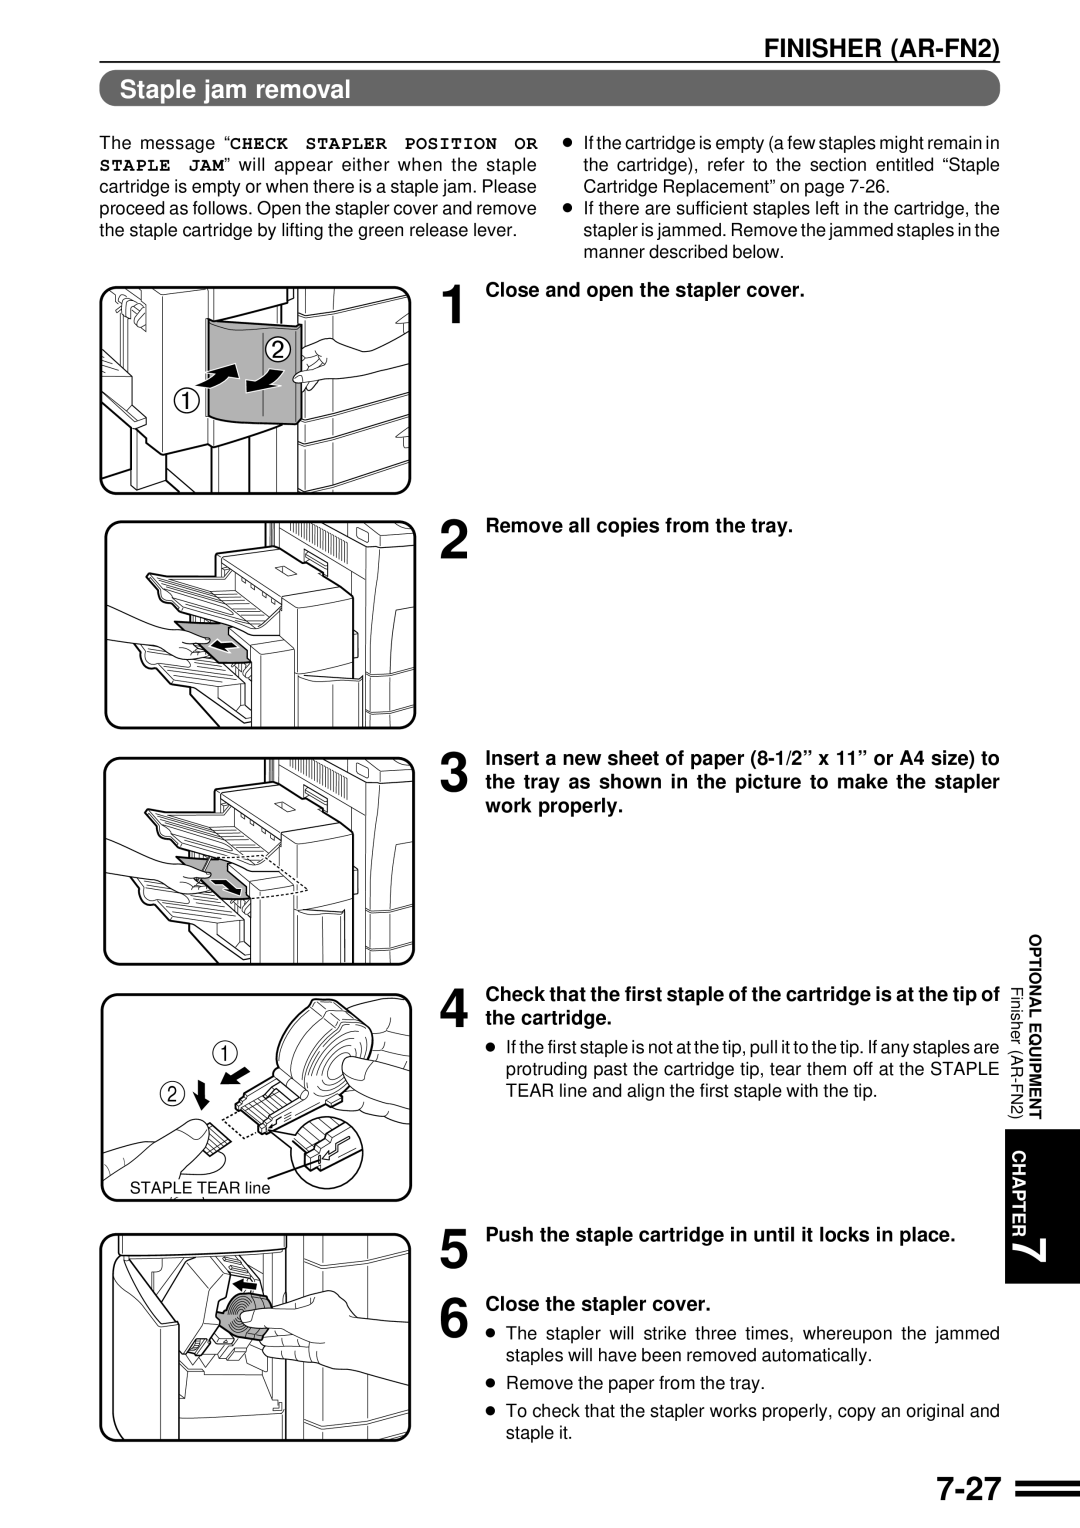 Sharp AR-287 7-27, Staple jam removal, Close and open the stapler cover 2 Remove all copies from the tray, the cartridge 